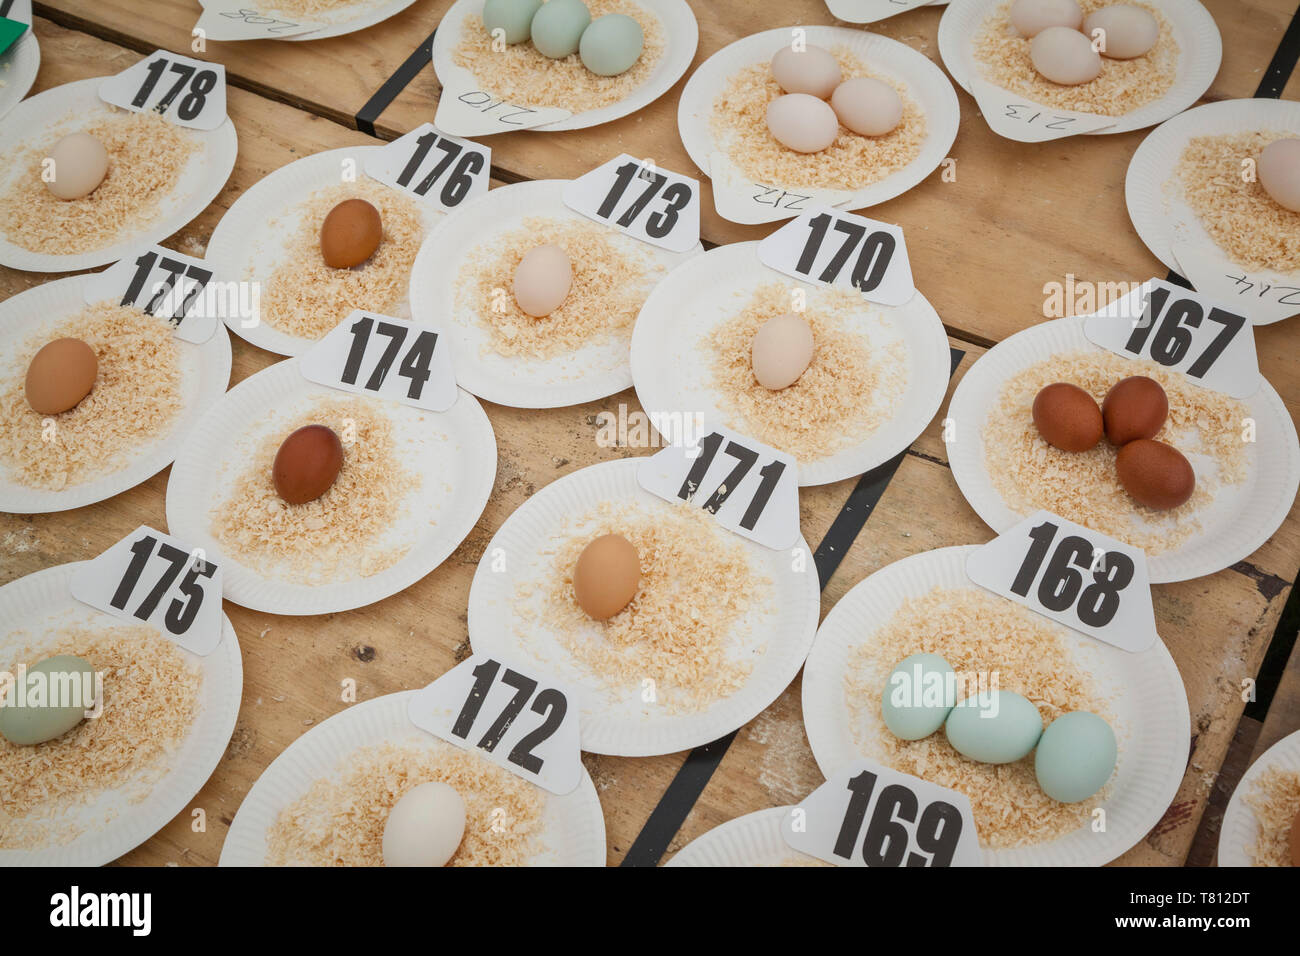 Plates of eggs on numbered paper plates laid out for judging at a country show for the Best Egg Competition Stock Photo